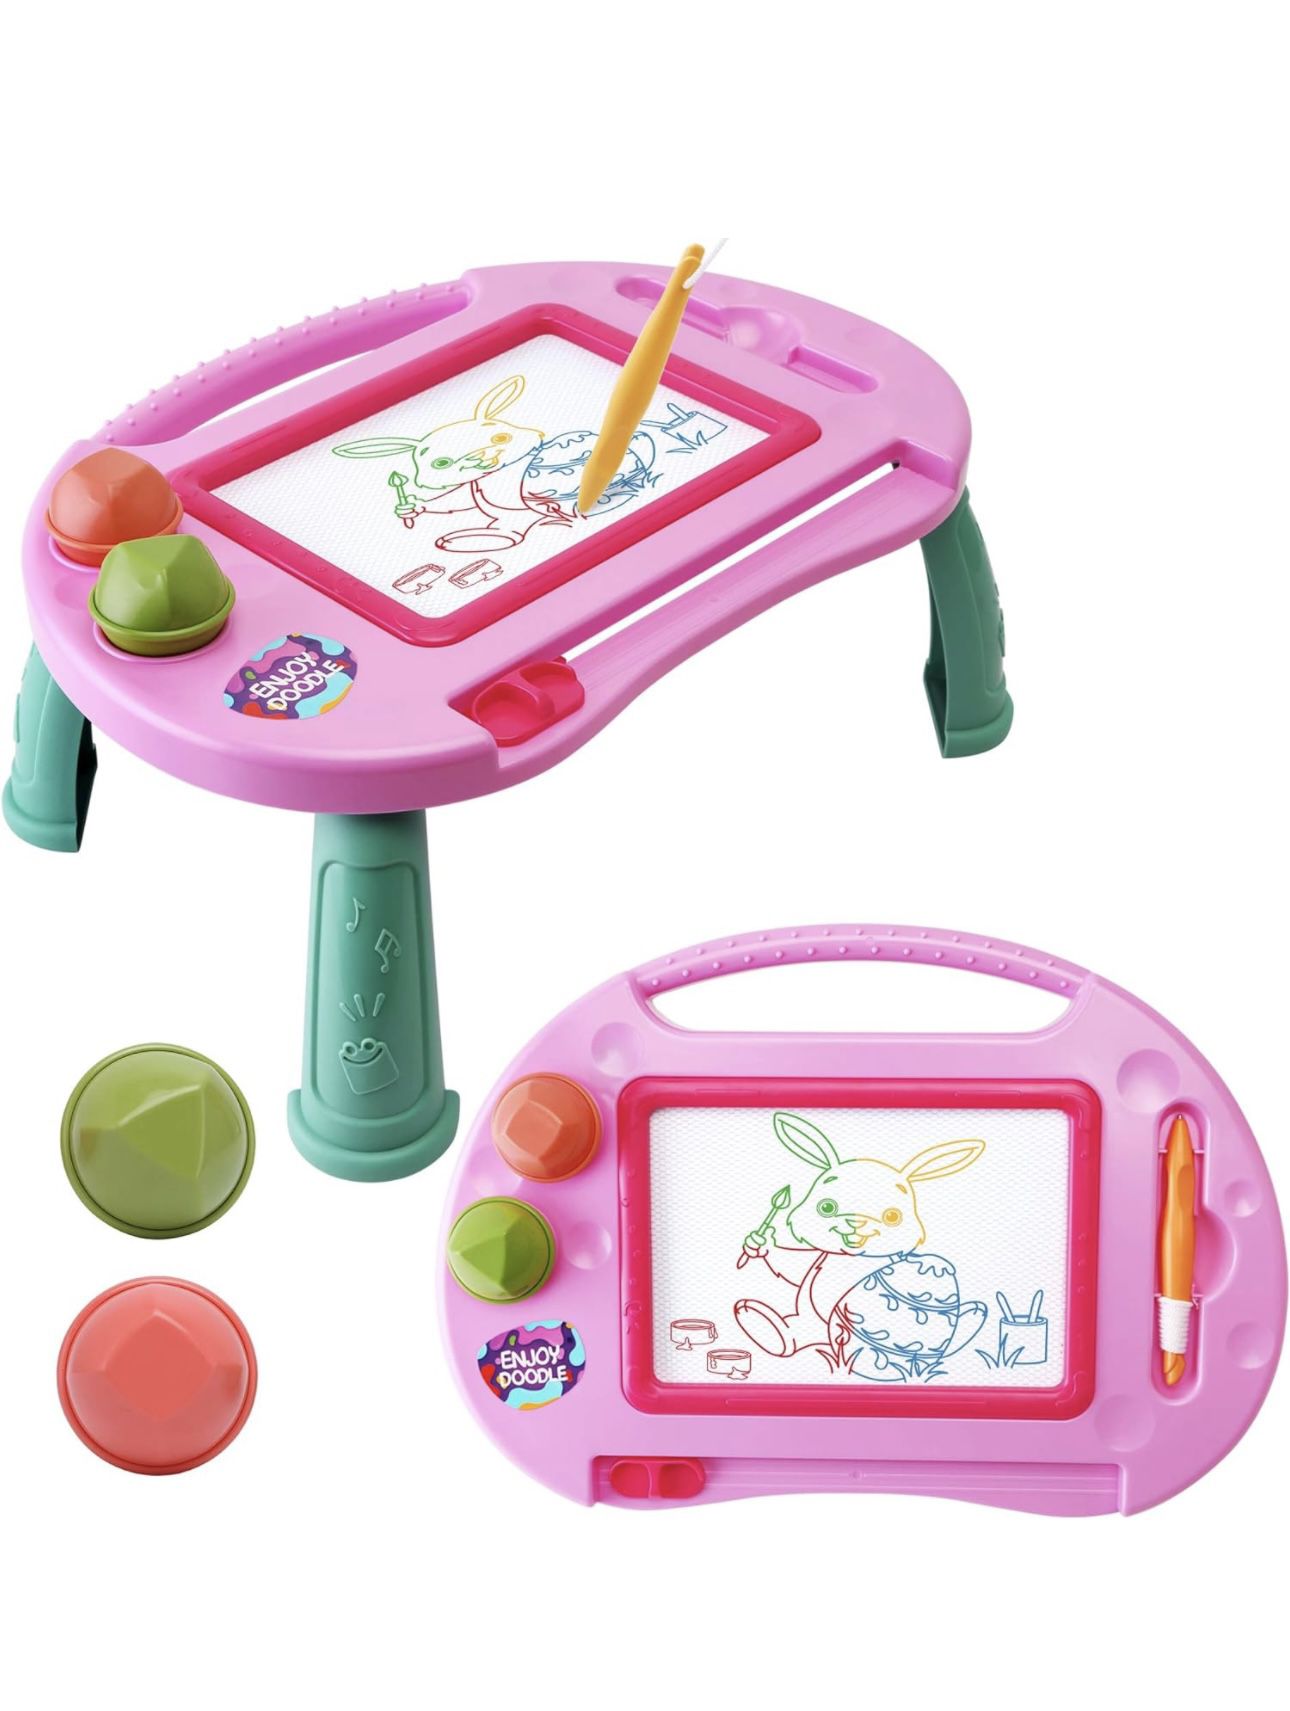 Toys for 1-2 Year Old Girls,Magnetic Drawing Board,Toddler Toys for Girls Age 2 3,Erasable Doodle Board for Kids,Learning Toys for Toddler 1 2 3,Gift 